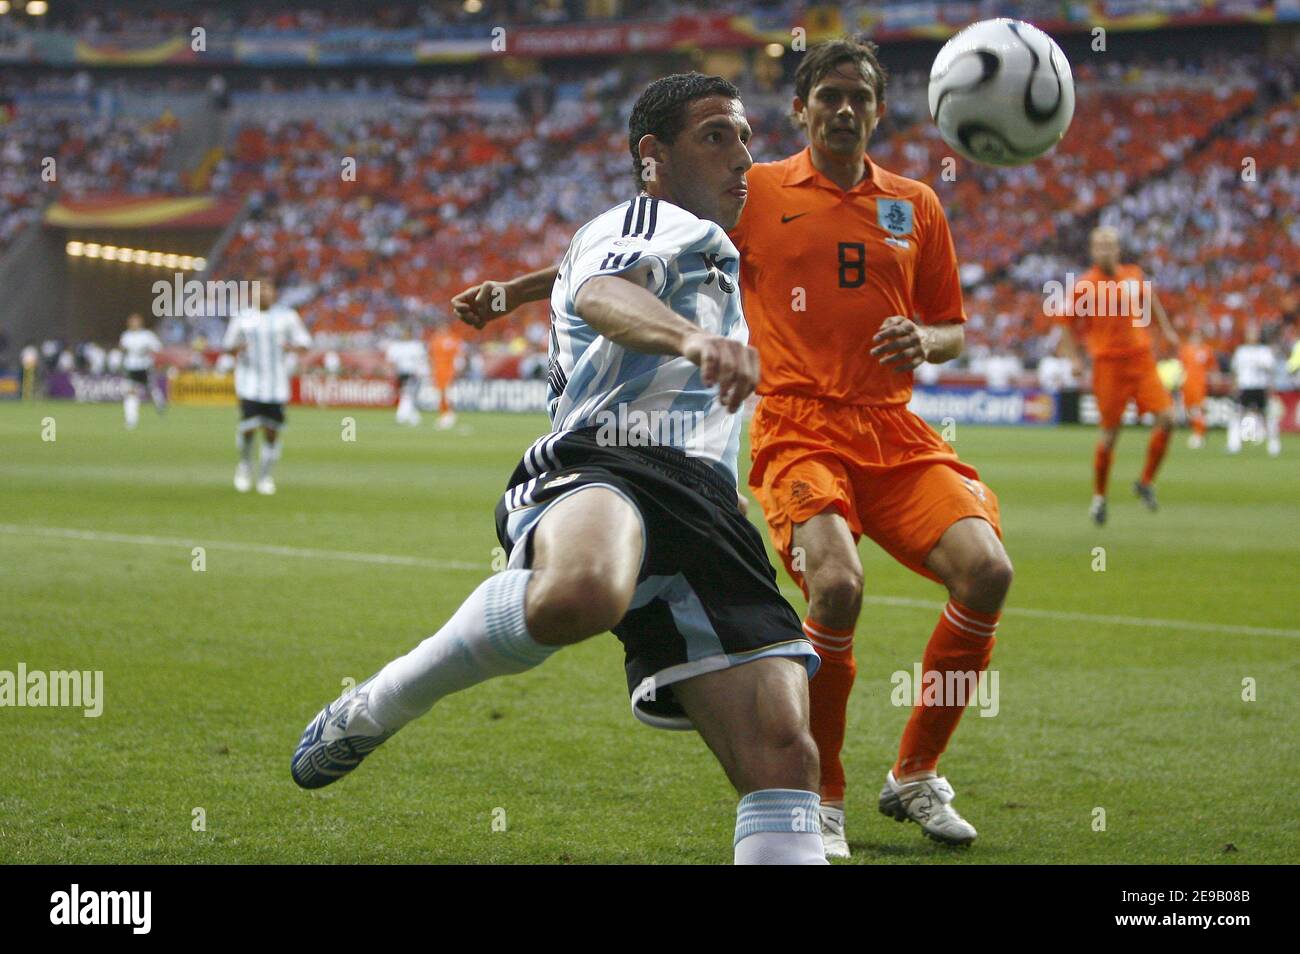 Argentina's Maxi Rodriguez and Netherlands' Philip Cocu during the World Cup 2006, Group C, Netherlands vs Argentina at the Commerzbank-Arena Stadium in Frankfurt, Germany on June 21, 2006. The match ended in 0-0 draw. Photo by Chritian Liewig/Cameleon/ABACAPRESS.COM Stock Photo